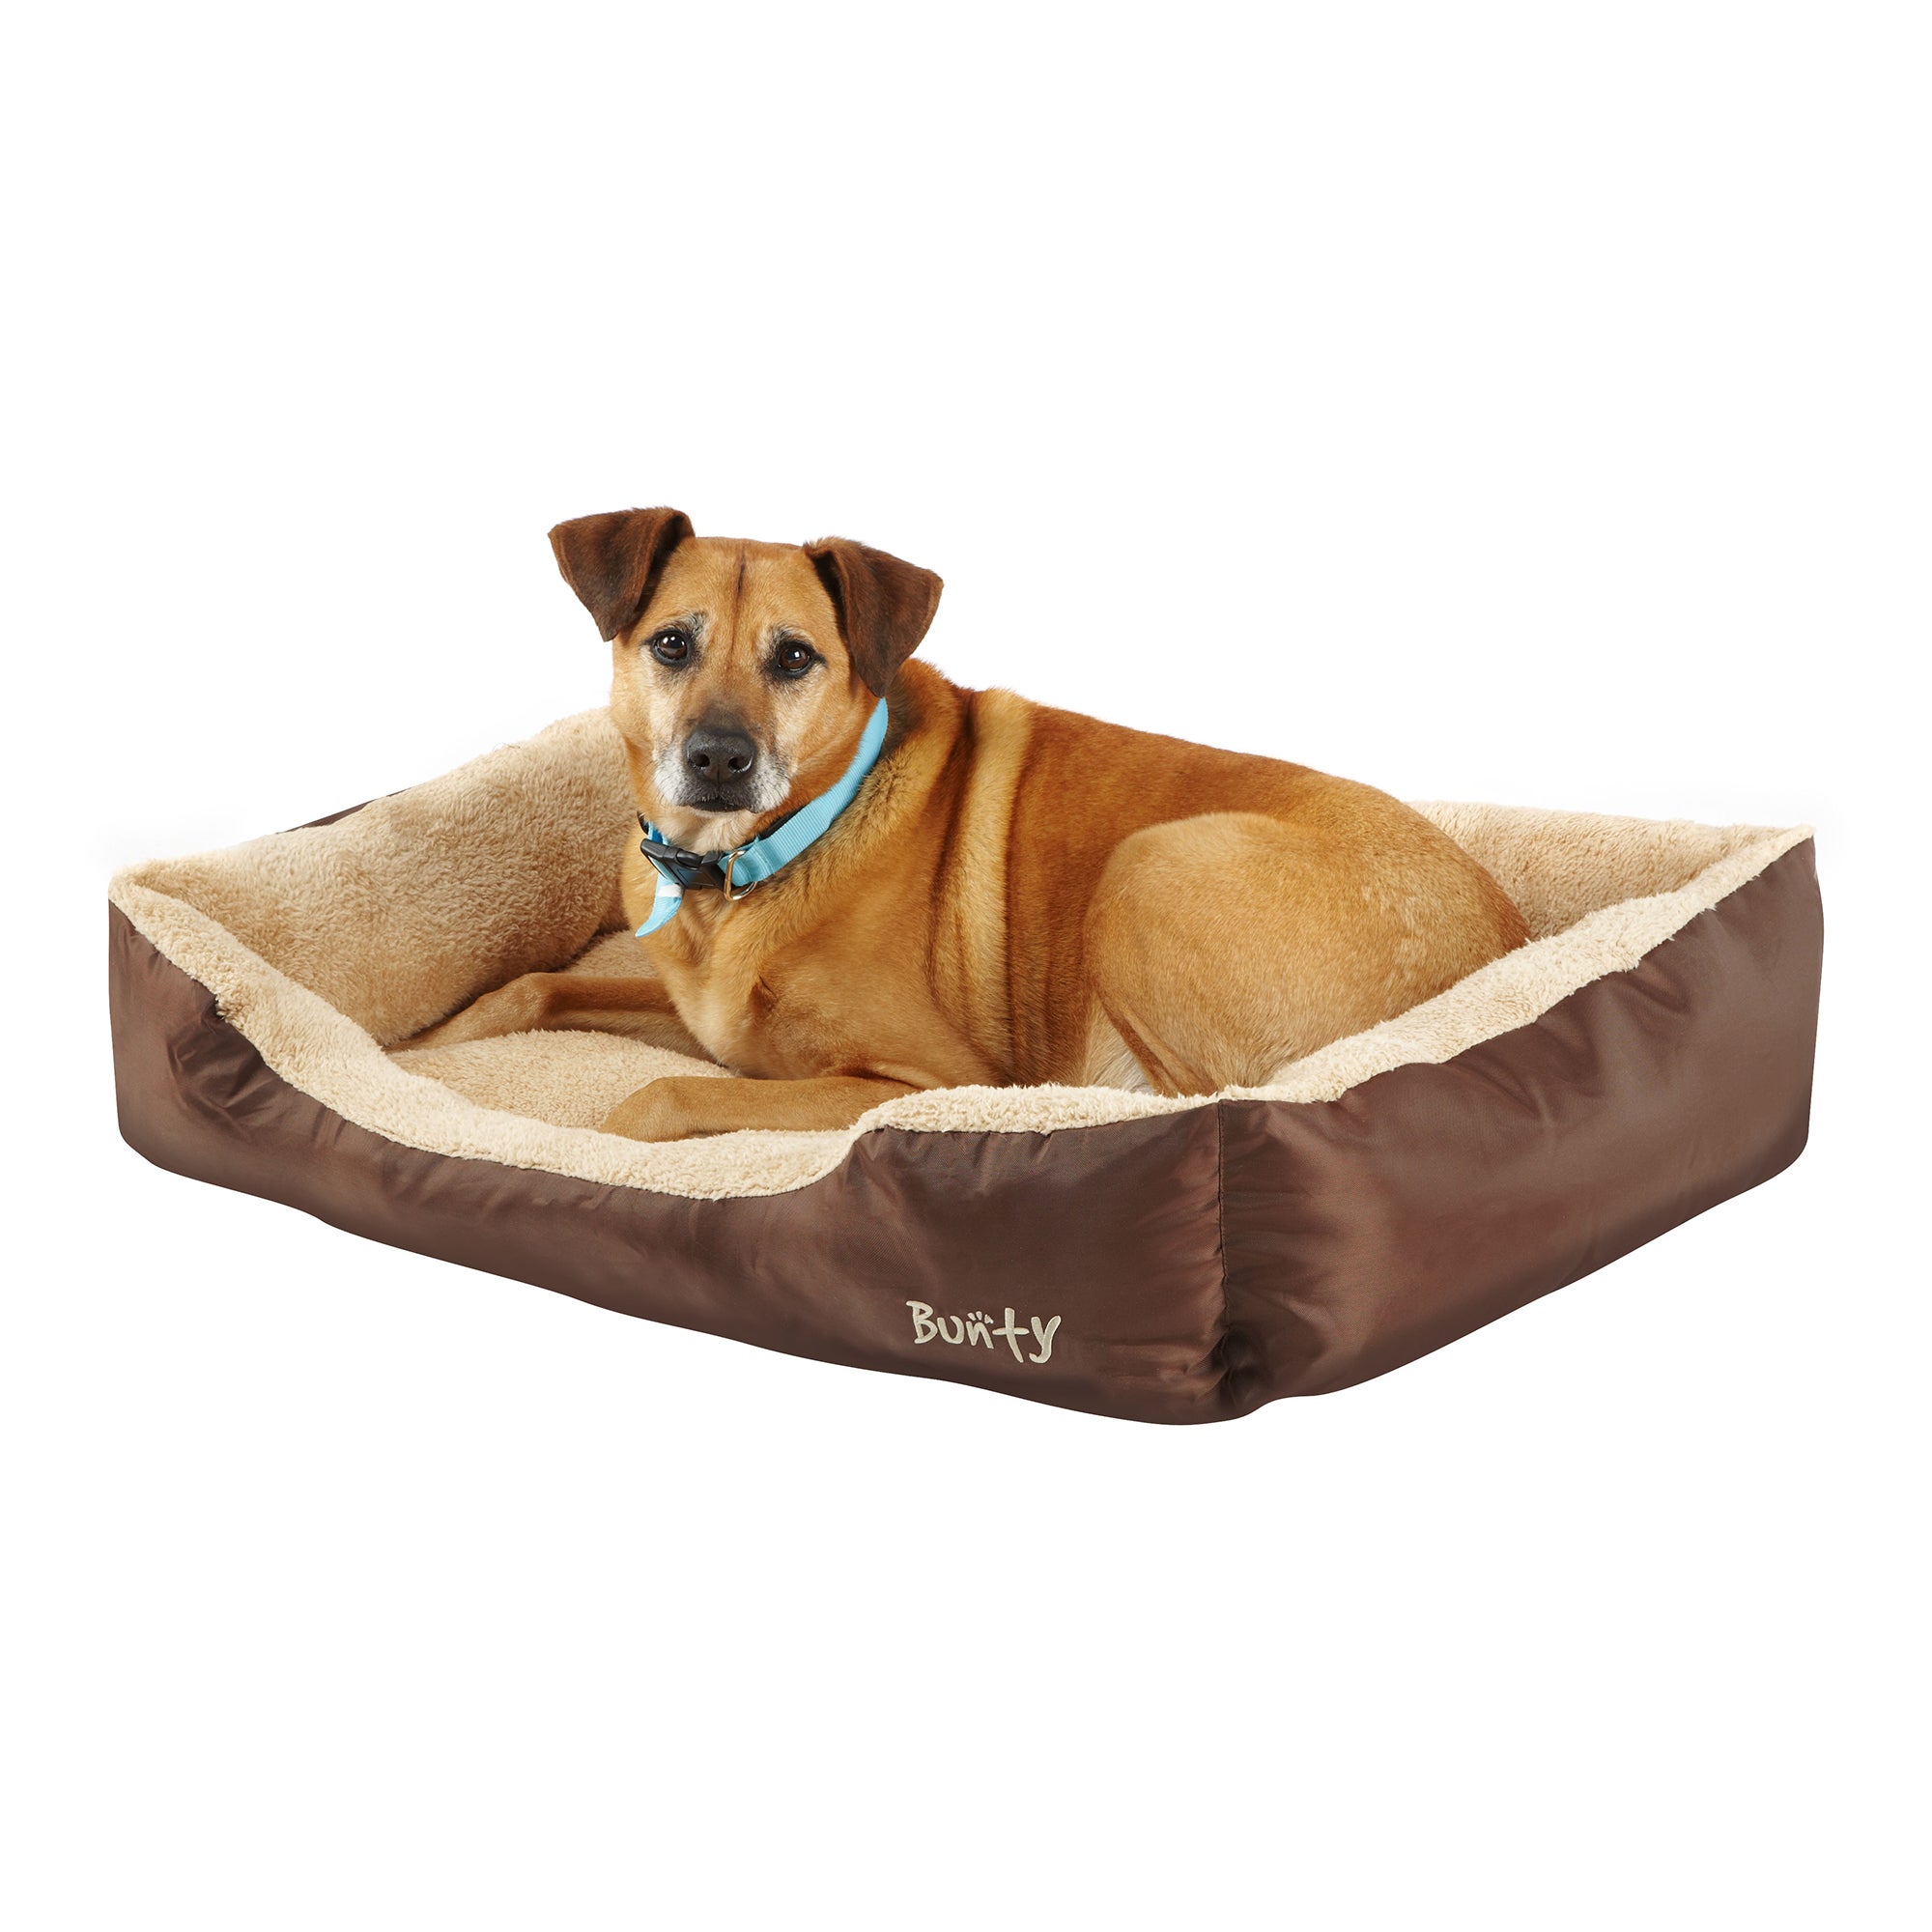 Bunty Deluxe Washable Dog Bed